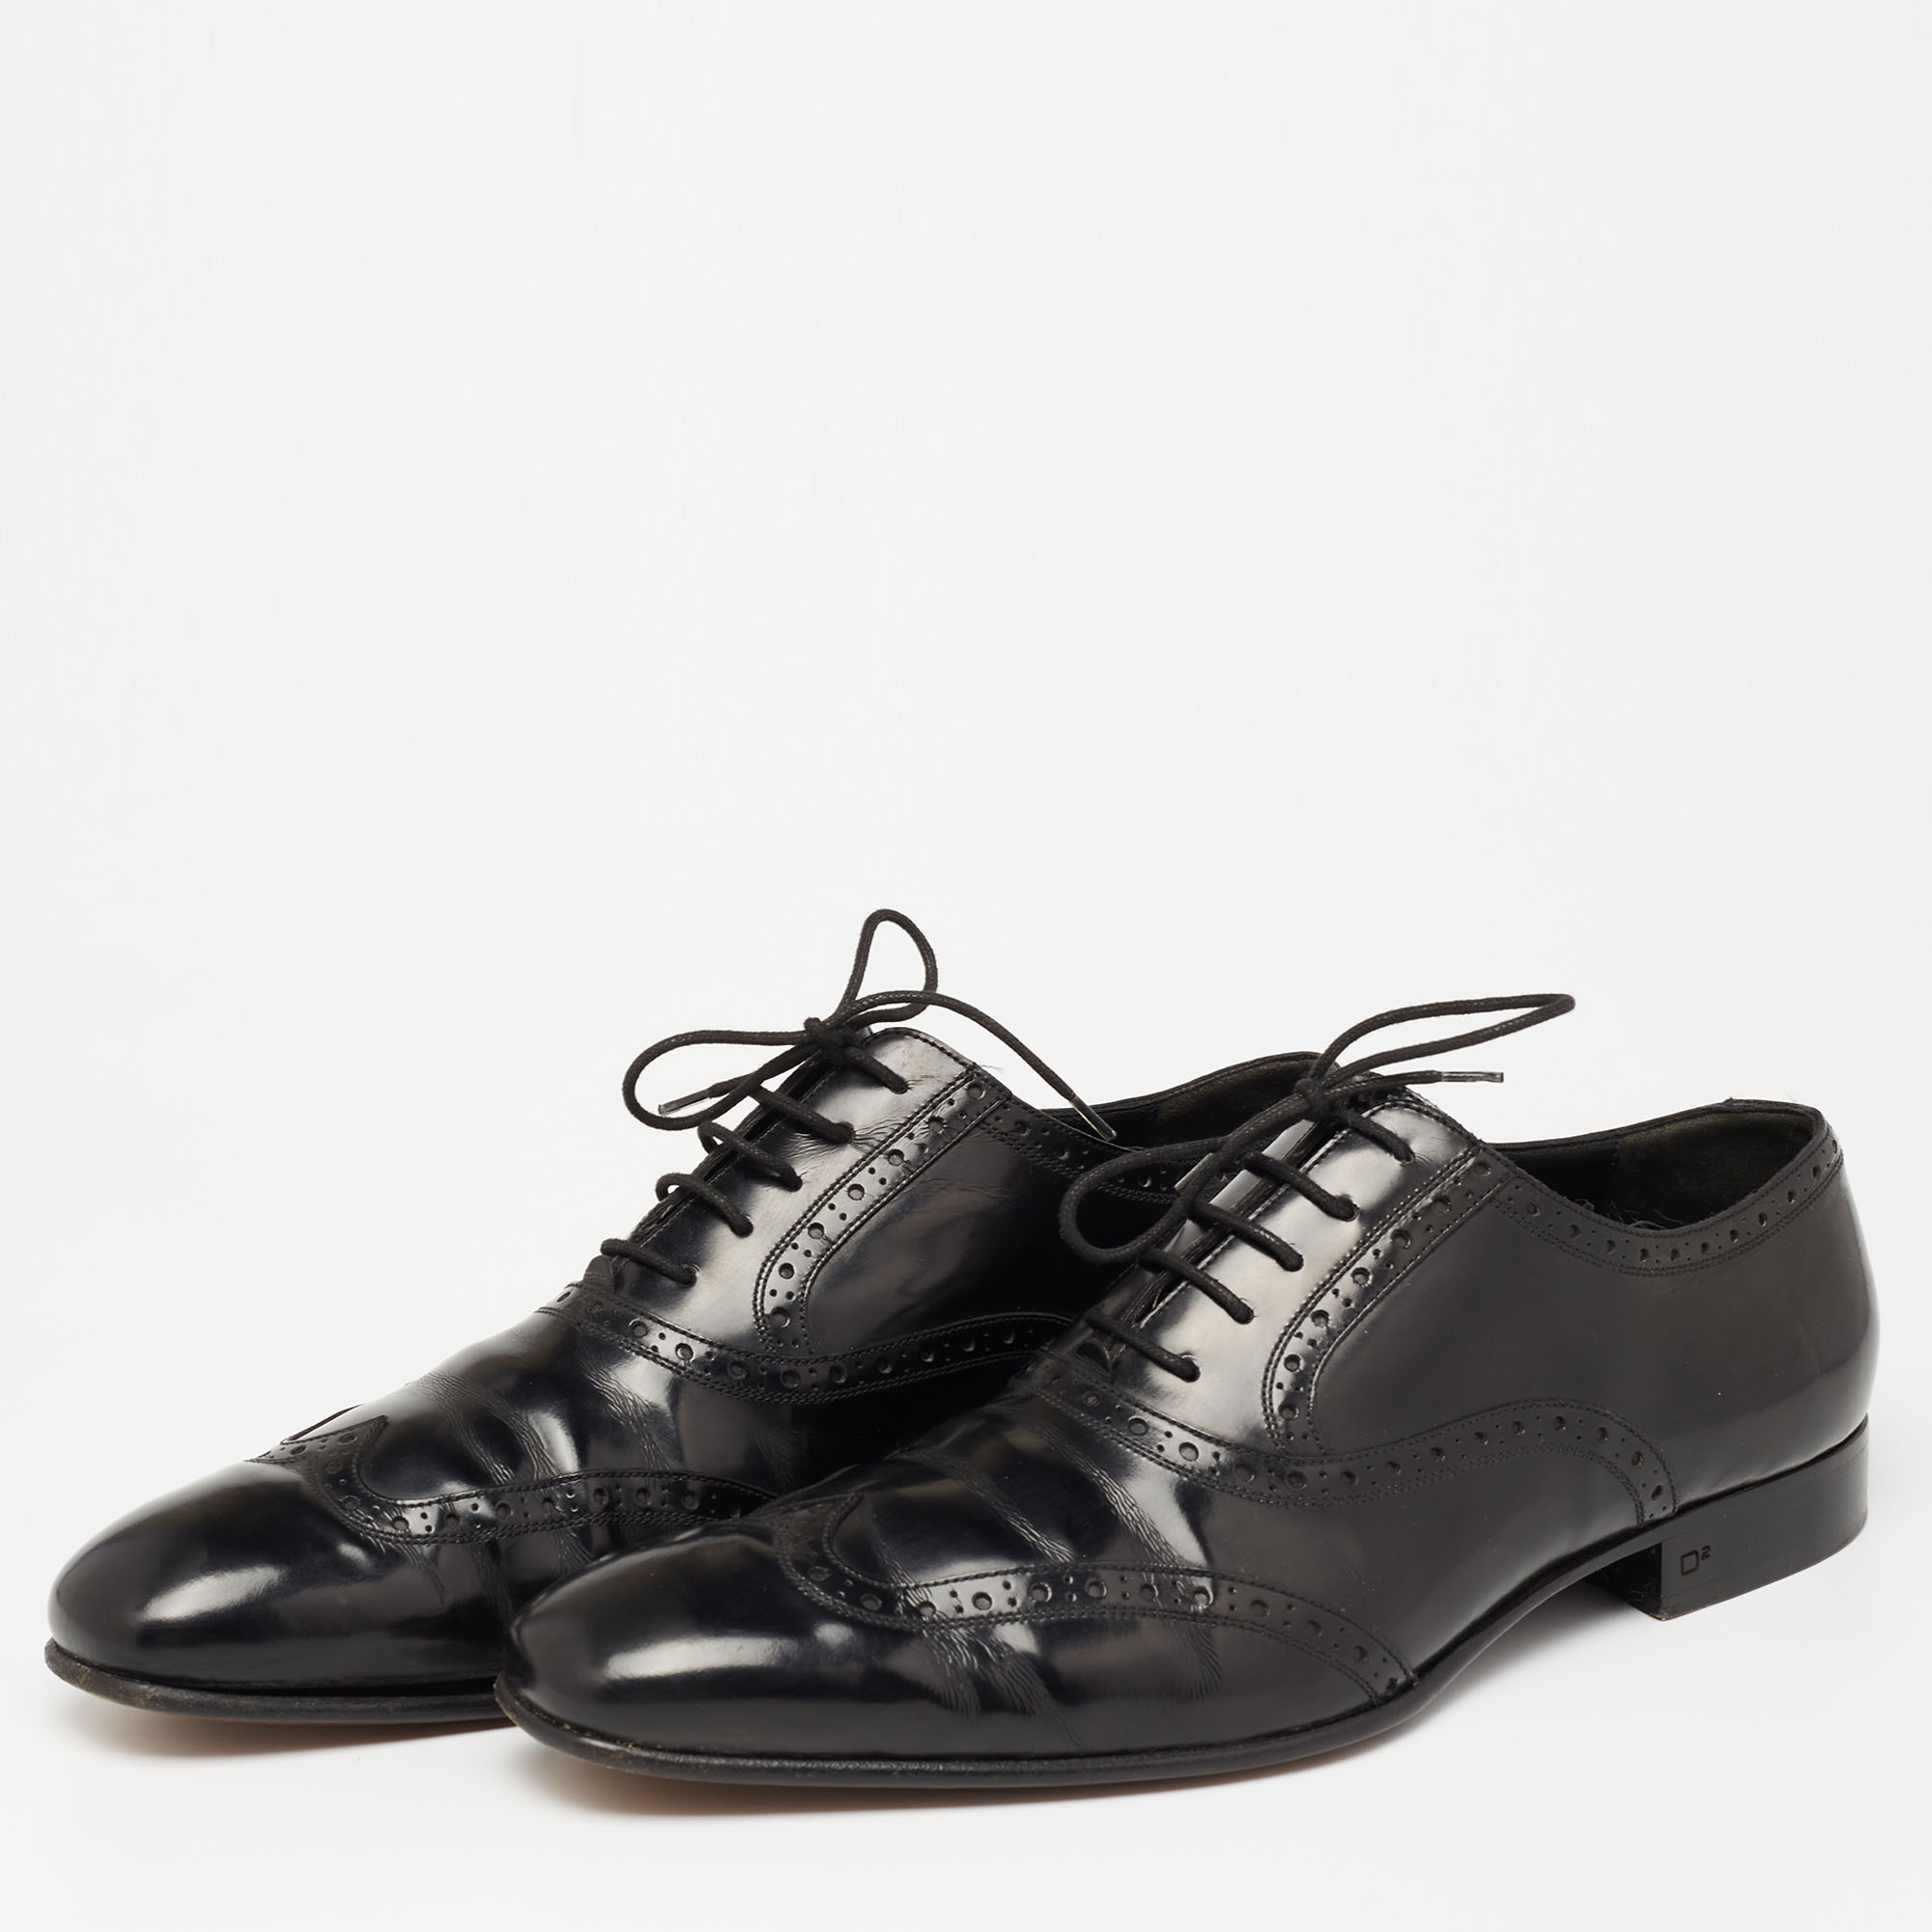 

Dsquared2 Black Brogue Patent Leather Oxfords Size